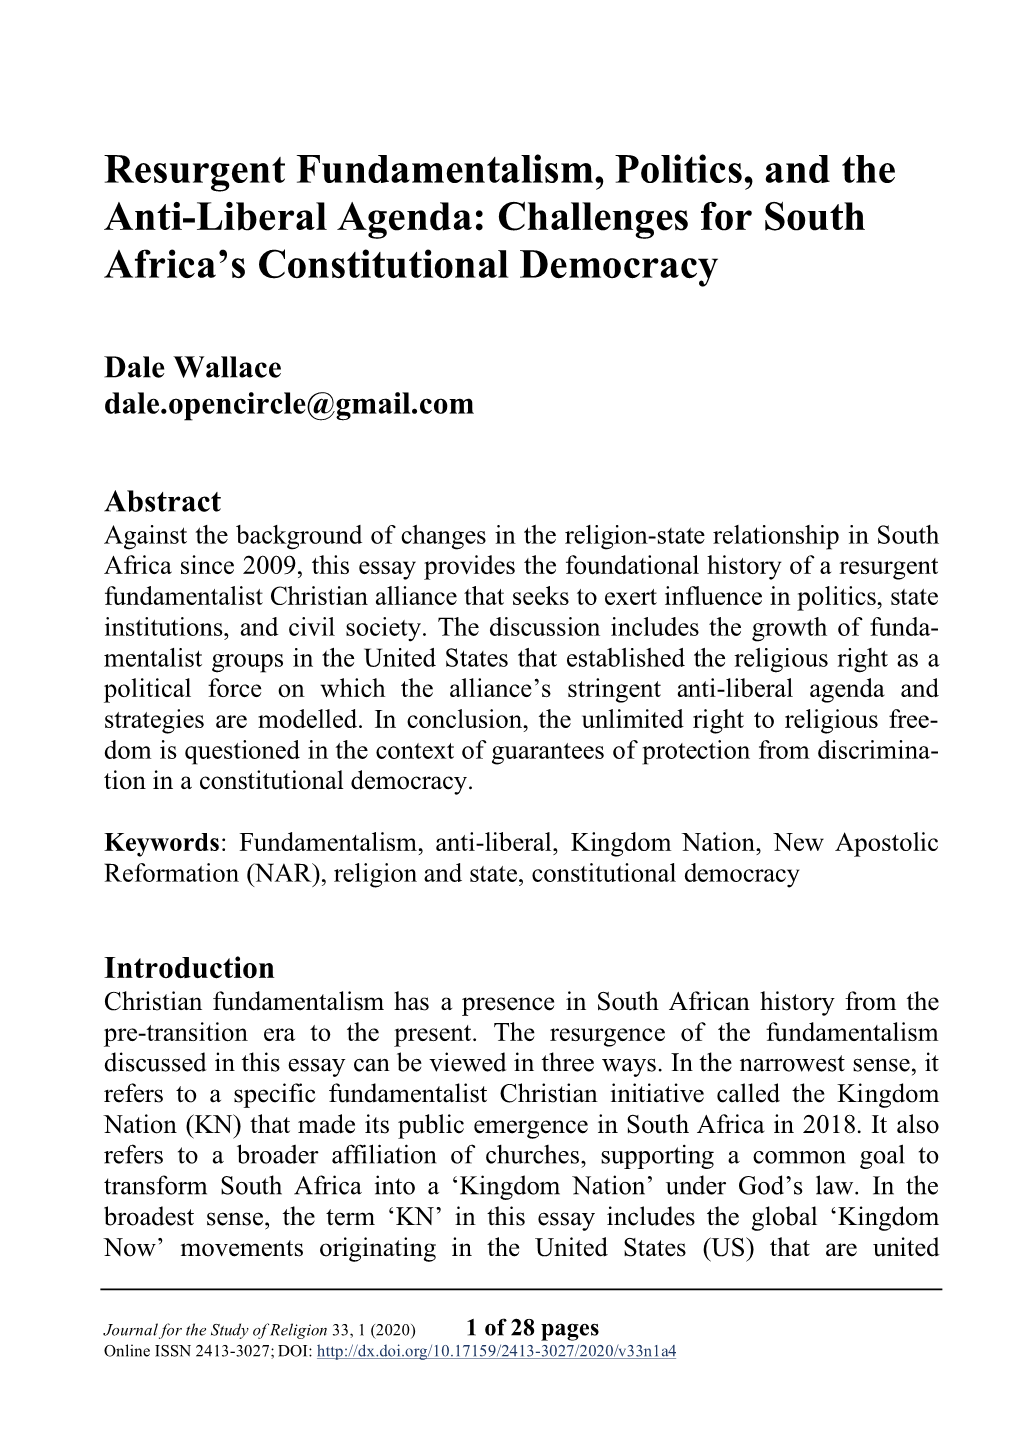 Resurgent Fundamentalism, Politics, and the Anti-Liberal Agenda: Challenges for South Africa's Constitutional Democracy